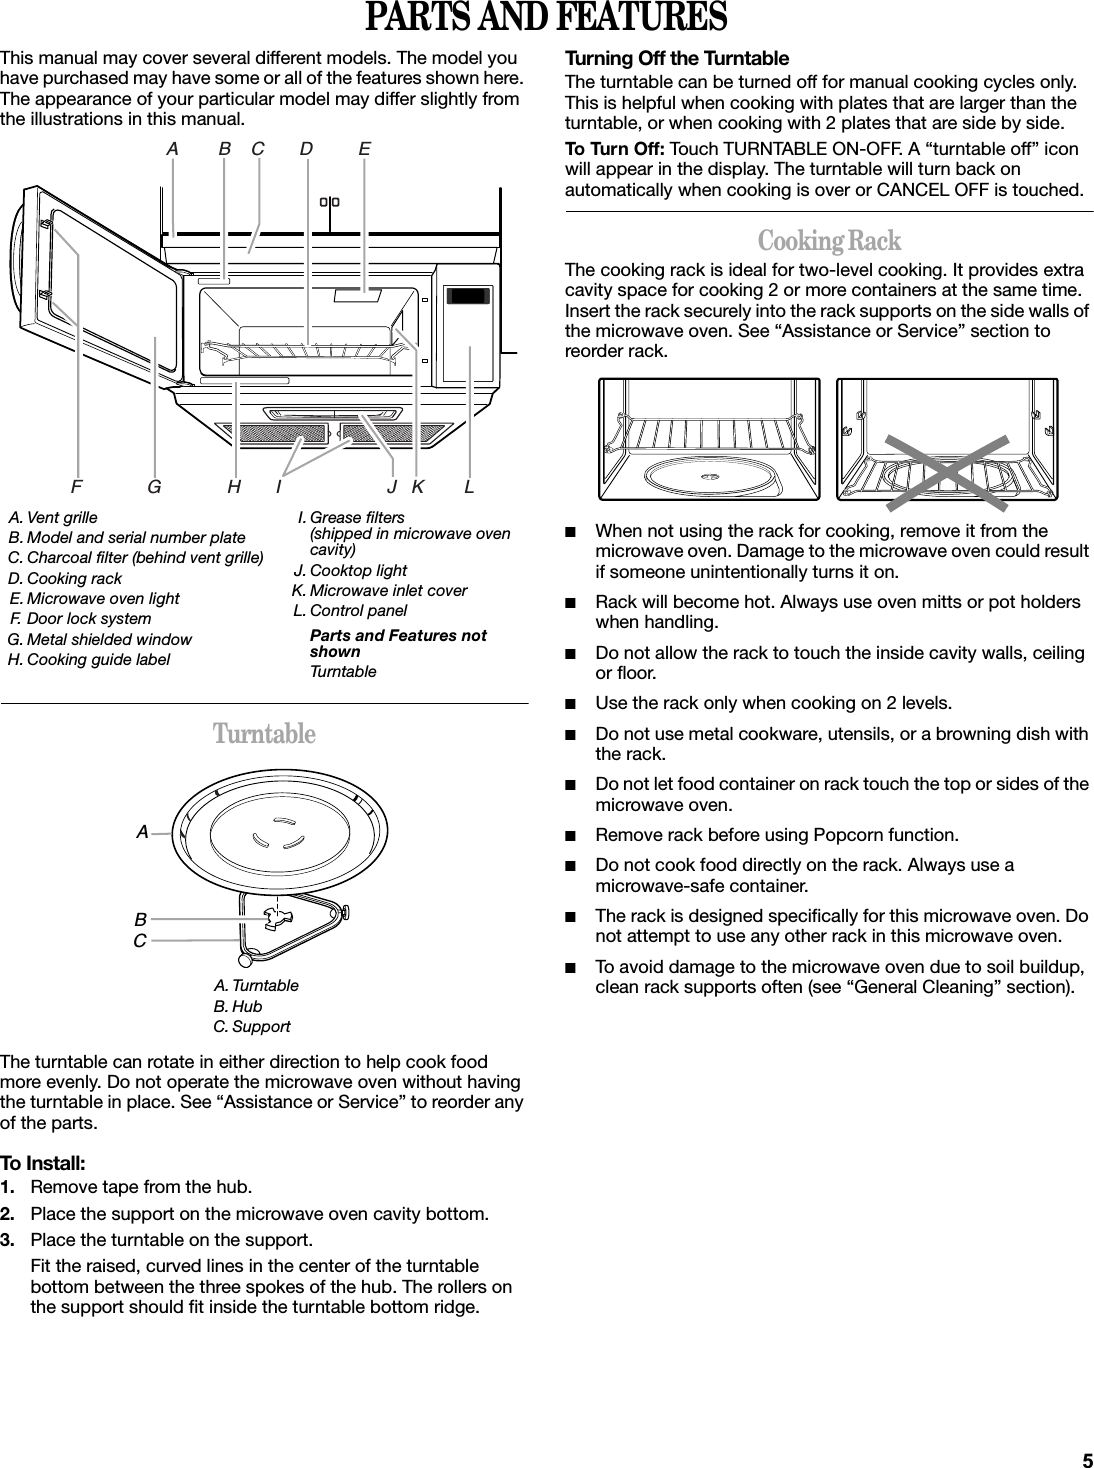 PARTS AND FEATURESThis manual may cover several different models. The model you have purchased may have some or all of the features shown here. The appearance of your particular model may differ slightly from the illustrations in this manual.TurntableThe turntable can rotate in either direction to help cook food more evenly. Do not operate the microwave oven without having the turntable in place. See “Assistance or Service” to reorder any of the parts.To Install:1. Remove tape from the hub.2. Place the support on the microwave oven cavity bottom.3. Place the turntable on the support.Fit the raised, curved lines in the center of the turntable bottom between the three spokes of the hub. The rollers on the support should fit inside the turntable bottom ridge.Turning Off the TurntableThe turntable can be turned off for manual cooking cycles only. This is helpful when cooking with plates that are larger than the turntable, or when cooking with 2 plates that are side by side.To Tur n Off: Touch TURNTABLE ON-OFF. A “turntable off” icon will appear in the display. The turntable will turn back on automatically when cooking is over or CANCEL OFF is touched.Cooking RackThe cooking rack is ideal for two-level cooking. It provides extra cavity space for cooking 2 or more containers at the same time. Insert the rack securely into the rack supports on the side walls of the microwave oven. See “Assistance or Service” section to reorder rack.■When not using the rack for cooking, remove it from the microwave oven. Damage to the microwave oven could result if someone unintentionally turns it on.■Rack will become hot. Always use oven mitts or pot holders when handling.■Do not allow the rack to touch the inside cavity walls, ceiling or floor.■Use the rack only when cooking on 2 levels.■Do not use metal cookware, utensils, or a browning dish with the rack.■Do not let food container on rack touch the top or sides of the microwave oven.■Remove rack before using Popcorn function.■Do not cook food directly on the rack. Always use a microwave-safe container.■The rack is designed specifically for this microwave oven. Do not attempt to use any other rack in this microwave oven.■To avoid damage to the microwave oven due to soil buildup, clean rack supports often (see “General Cleaning” section).A. Vent grilleB. Model and serial number plateC. Charcoal filter (behind vent grille)D. Cooking rackE. Microwave oven lightF. Door lock systemG. Metal shielded windowH. Cooking guide labelI. Grease filters (shipped in microwave oven cavity)J. Cooktop lightK. Microwave inlet coverL. Control panelParts and Features not shownTurntableA. TurntableB. HubC. SupportA        B    C       D         EF             G             H       I                     J   K        LABC